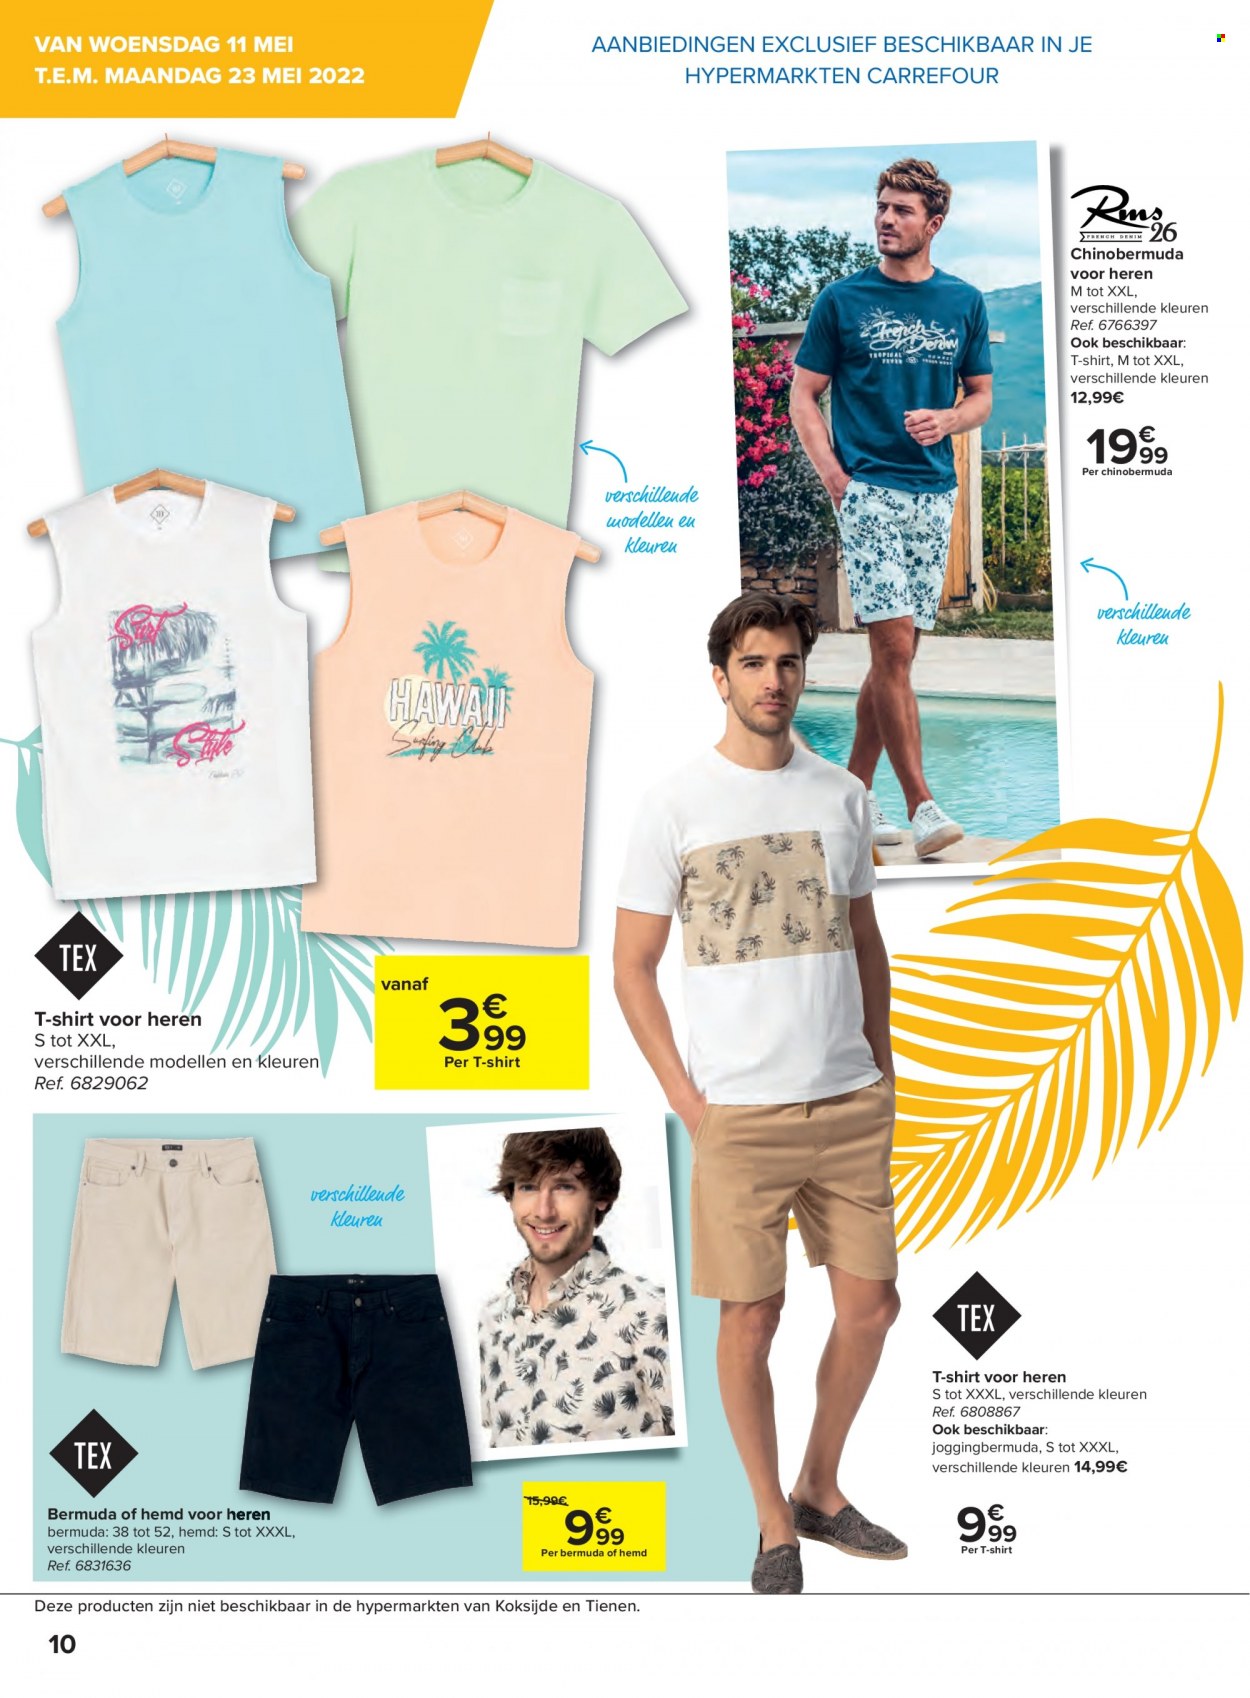 Catalogue Carrefour hypermarkt - 11.5.2022 - 23.5.2022. Page 10.